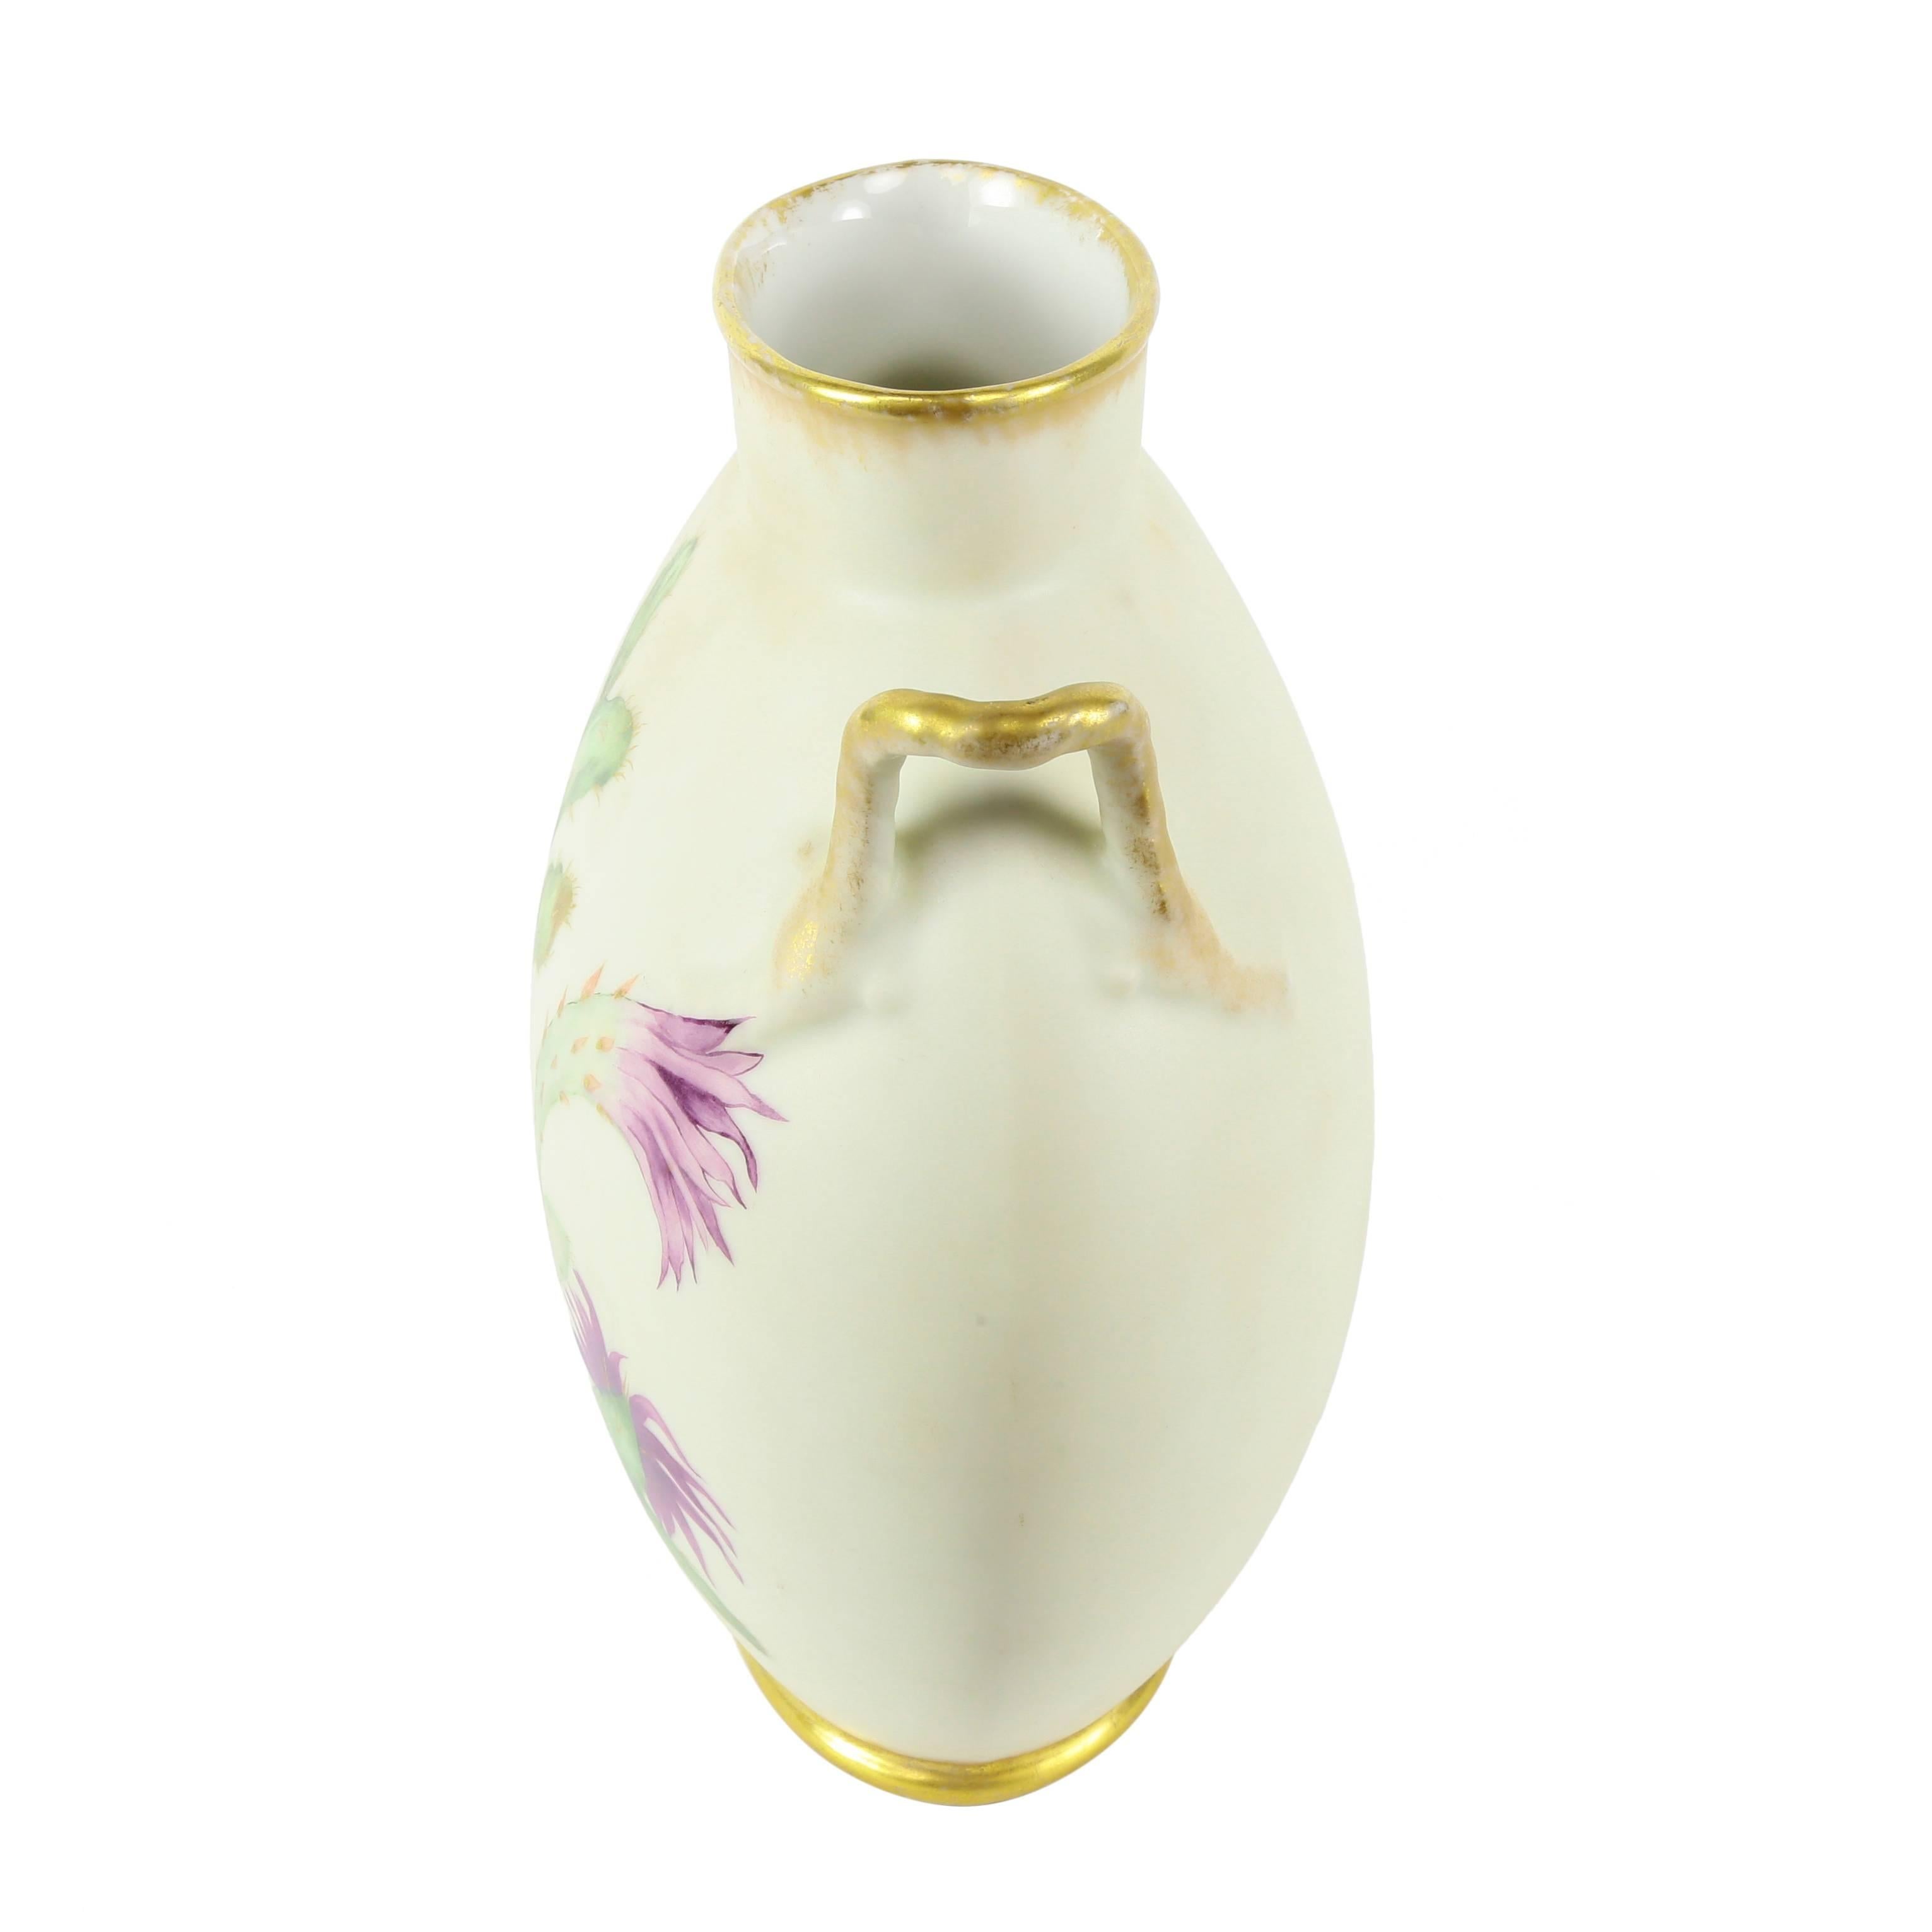 Limoges porcelain pillow vase the perfect answer to decorating a narrow space, such as mantel place. Hand-painted floral and Cacti decoration. The handles add to the beauty and balance of the vase, circa 1890s. Add a beautiful decorative touch to